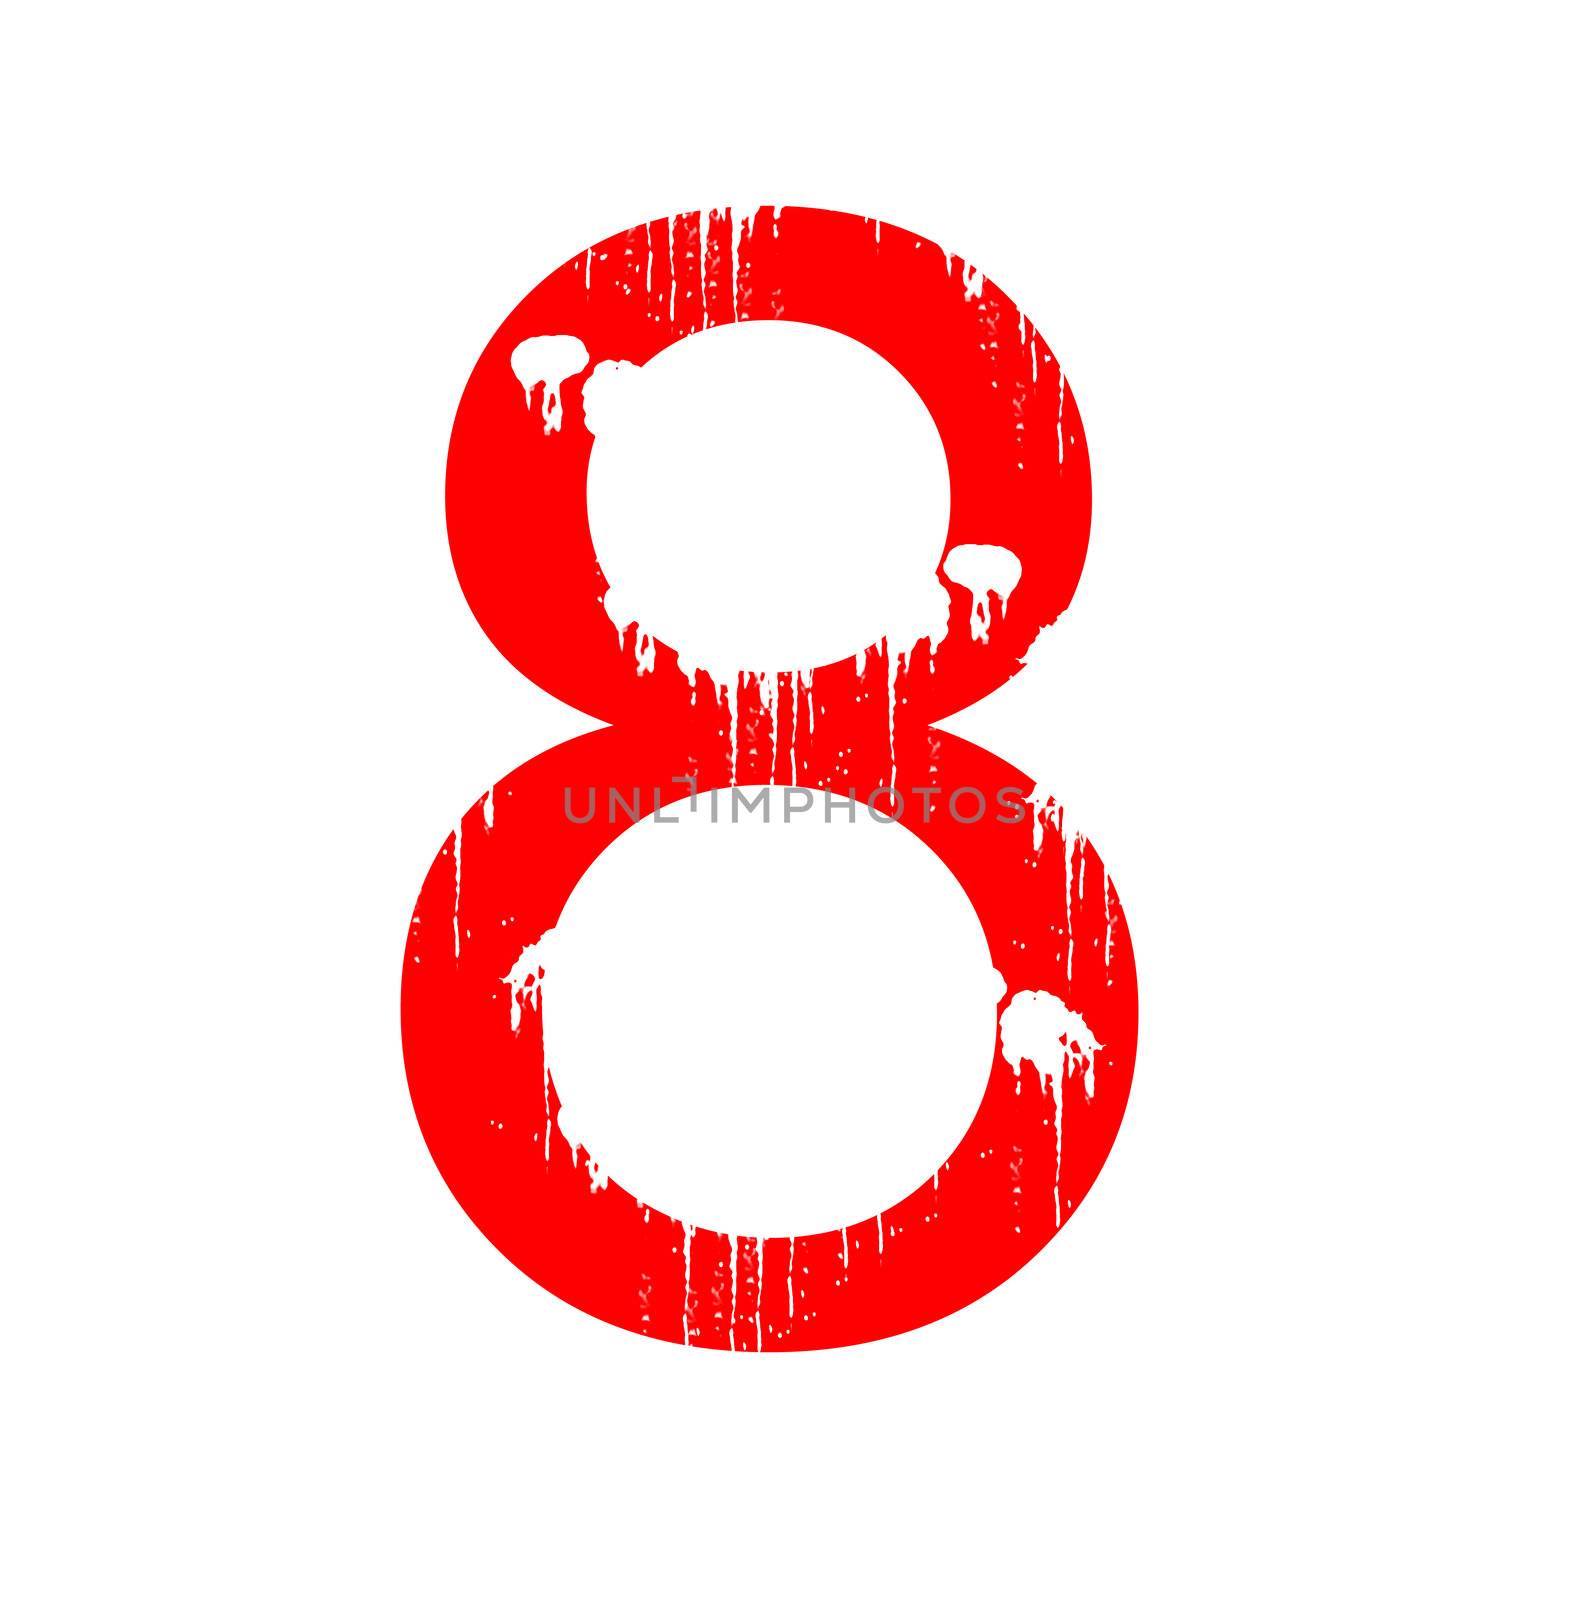 A red alphanumeric character in grunge style on a white background. One of a series of the twenty six letters of the English alphabet and the numbers zero to nine.